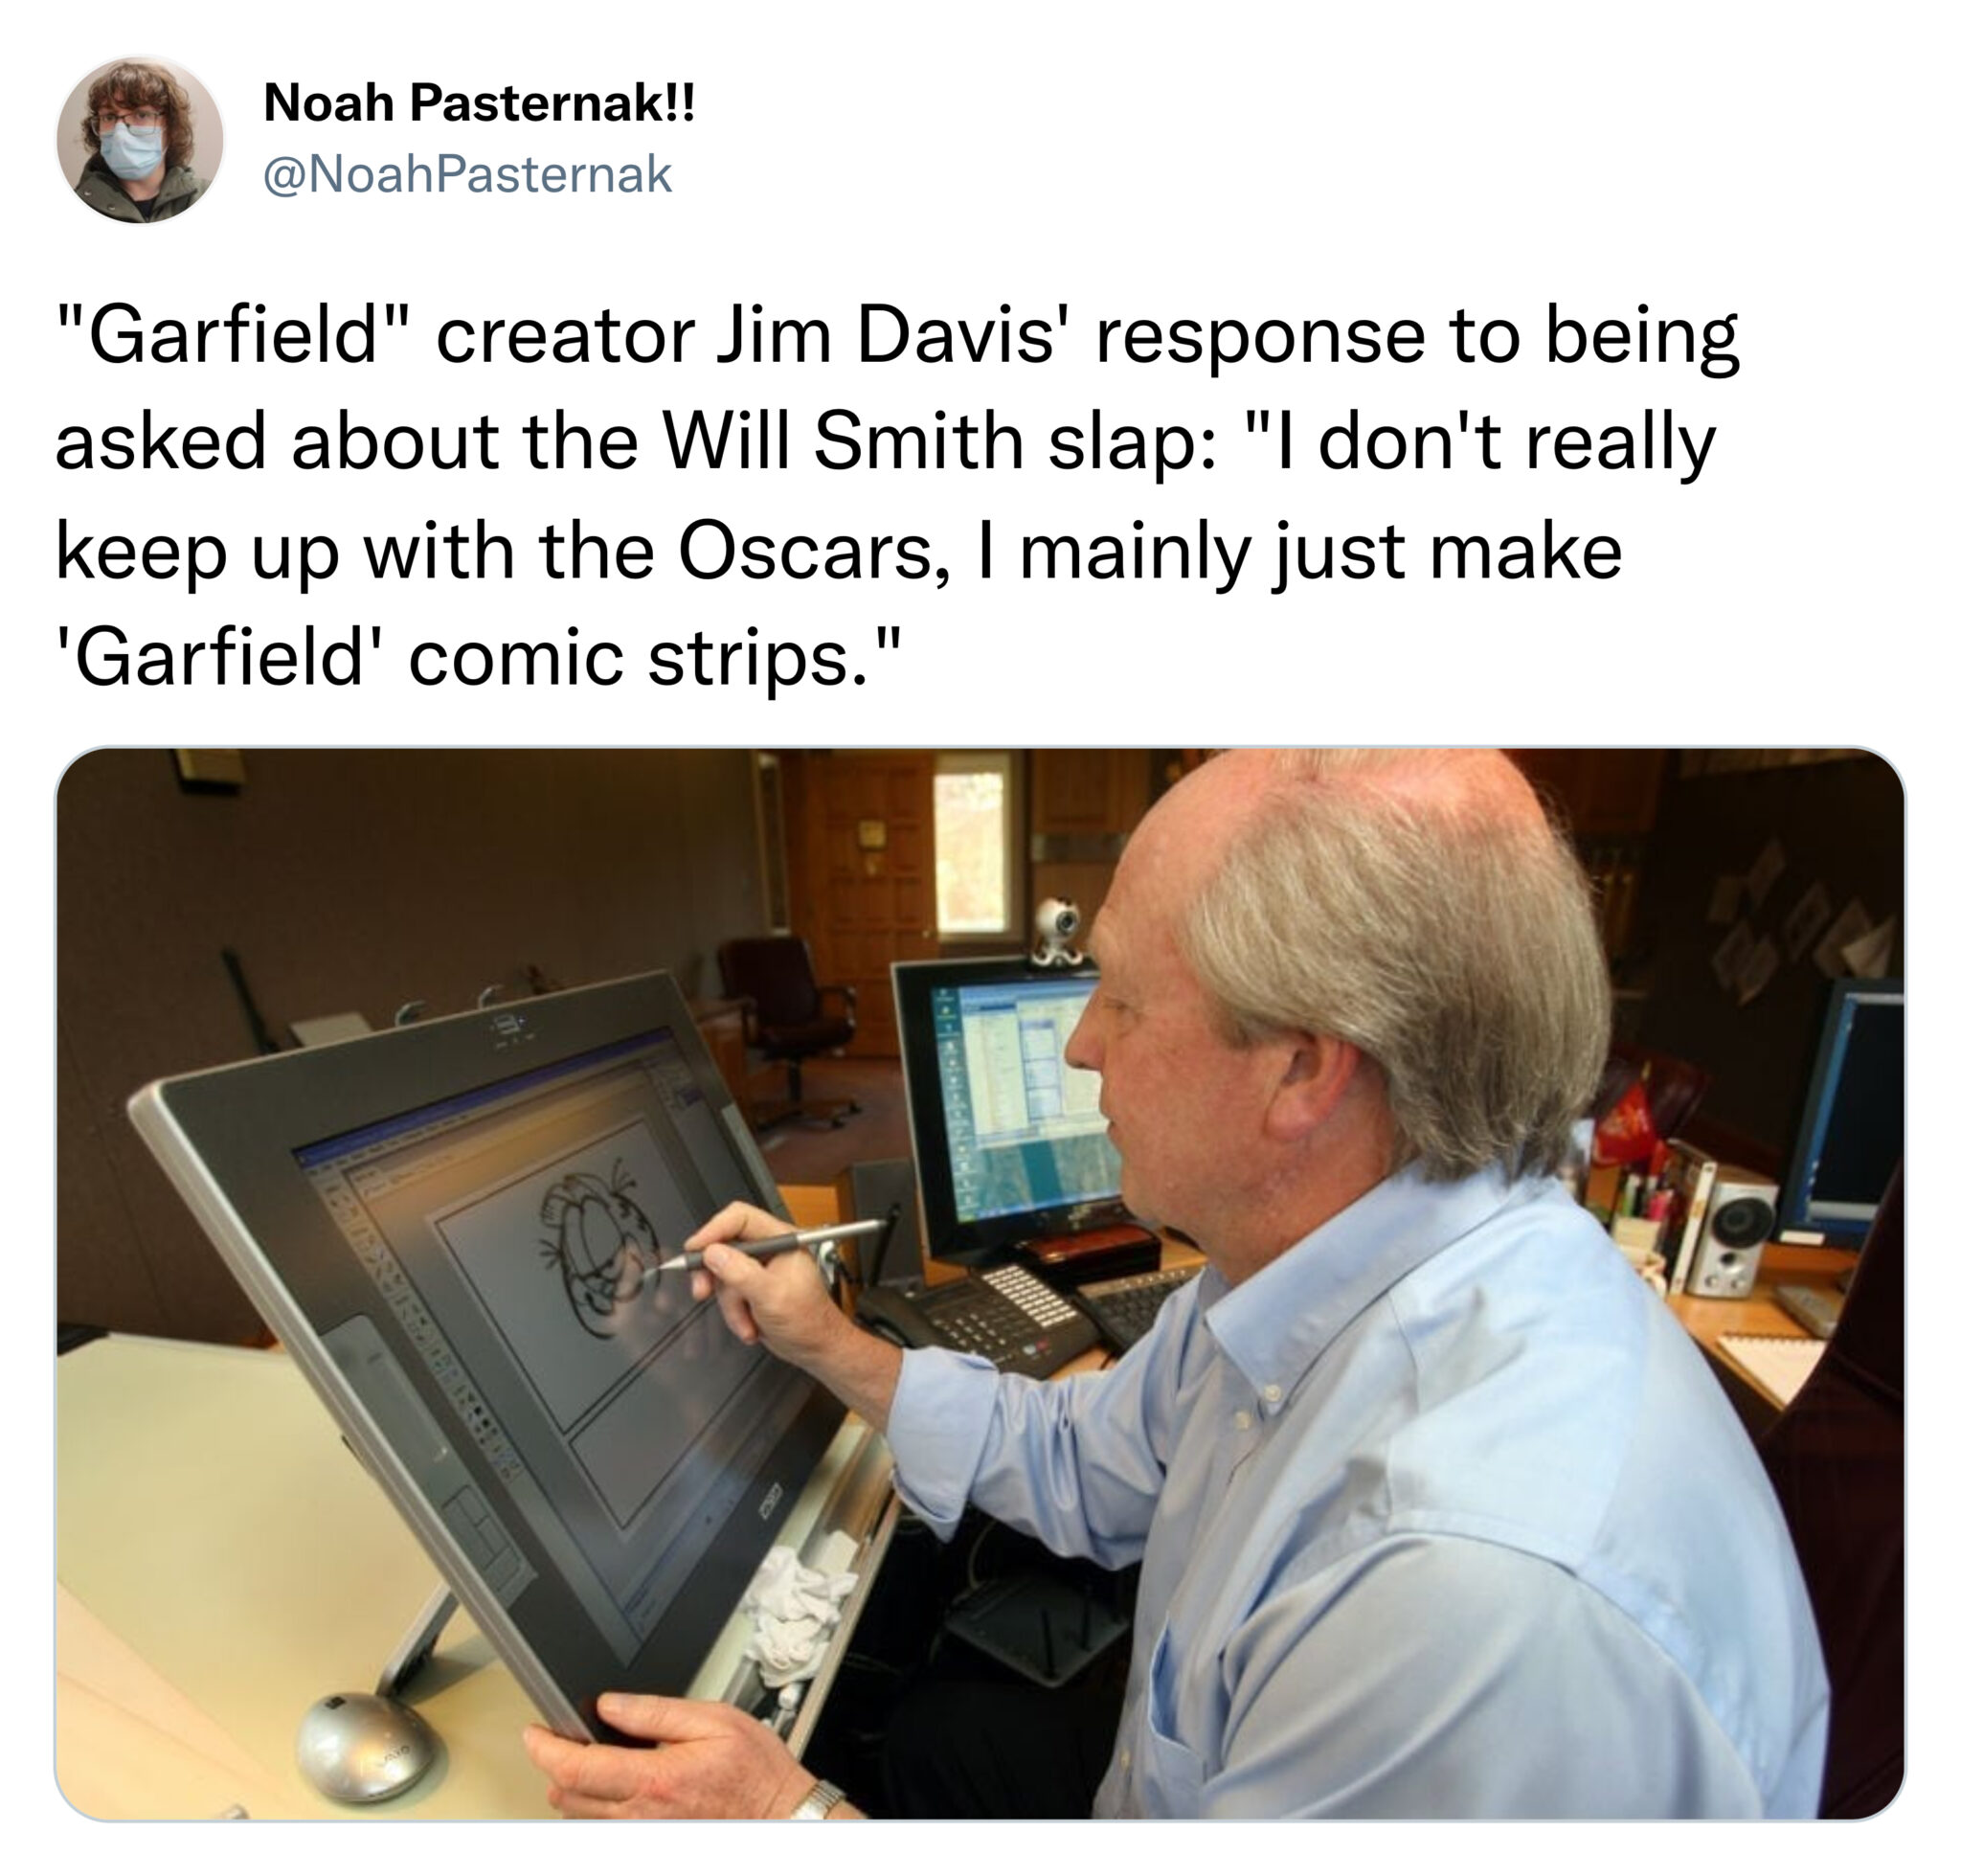 funny tweets - jim davis garfield creator - Noah Pasternak!! "Garfield" creator Jim Davis' response to being asked about the Will Smith slap "I don't really keep up with the Oscars, I mainly just make 'Garfield' comic strips." M 19